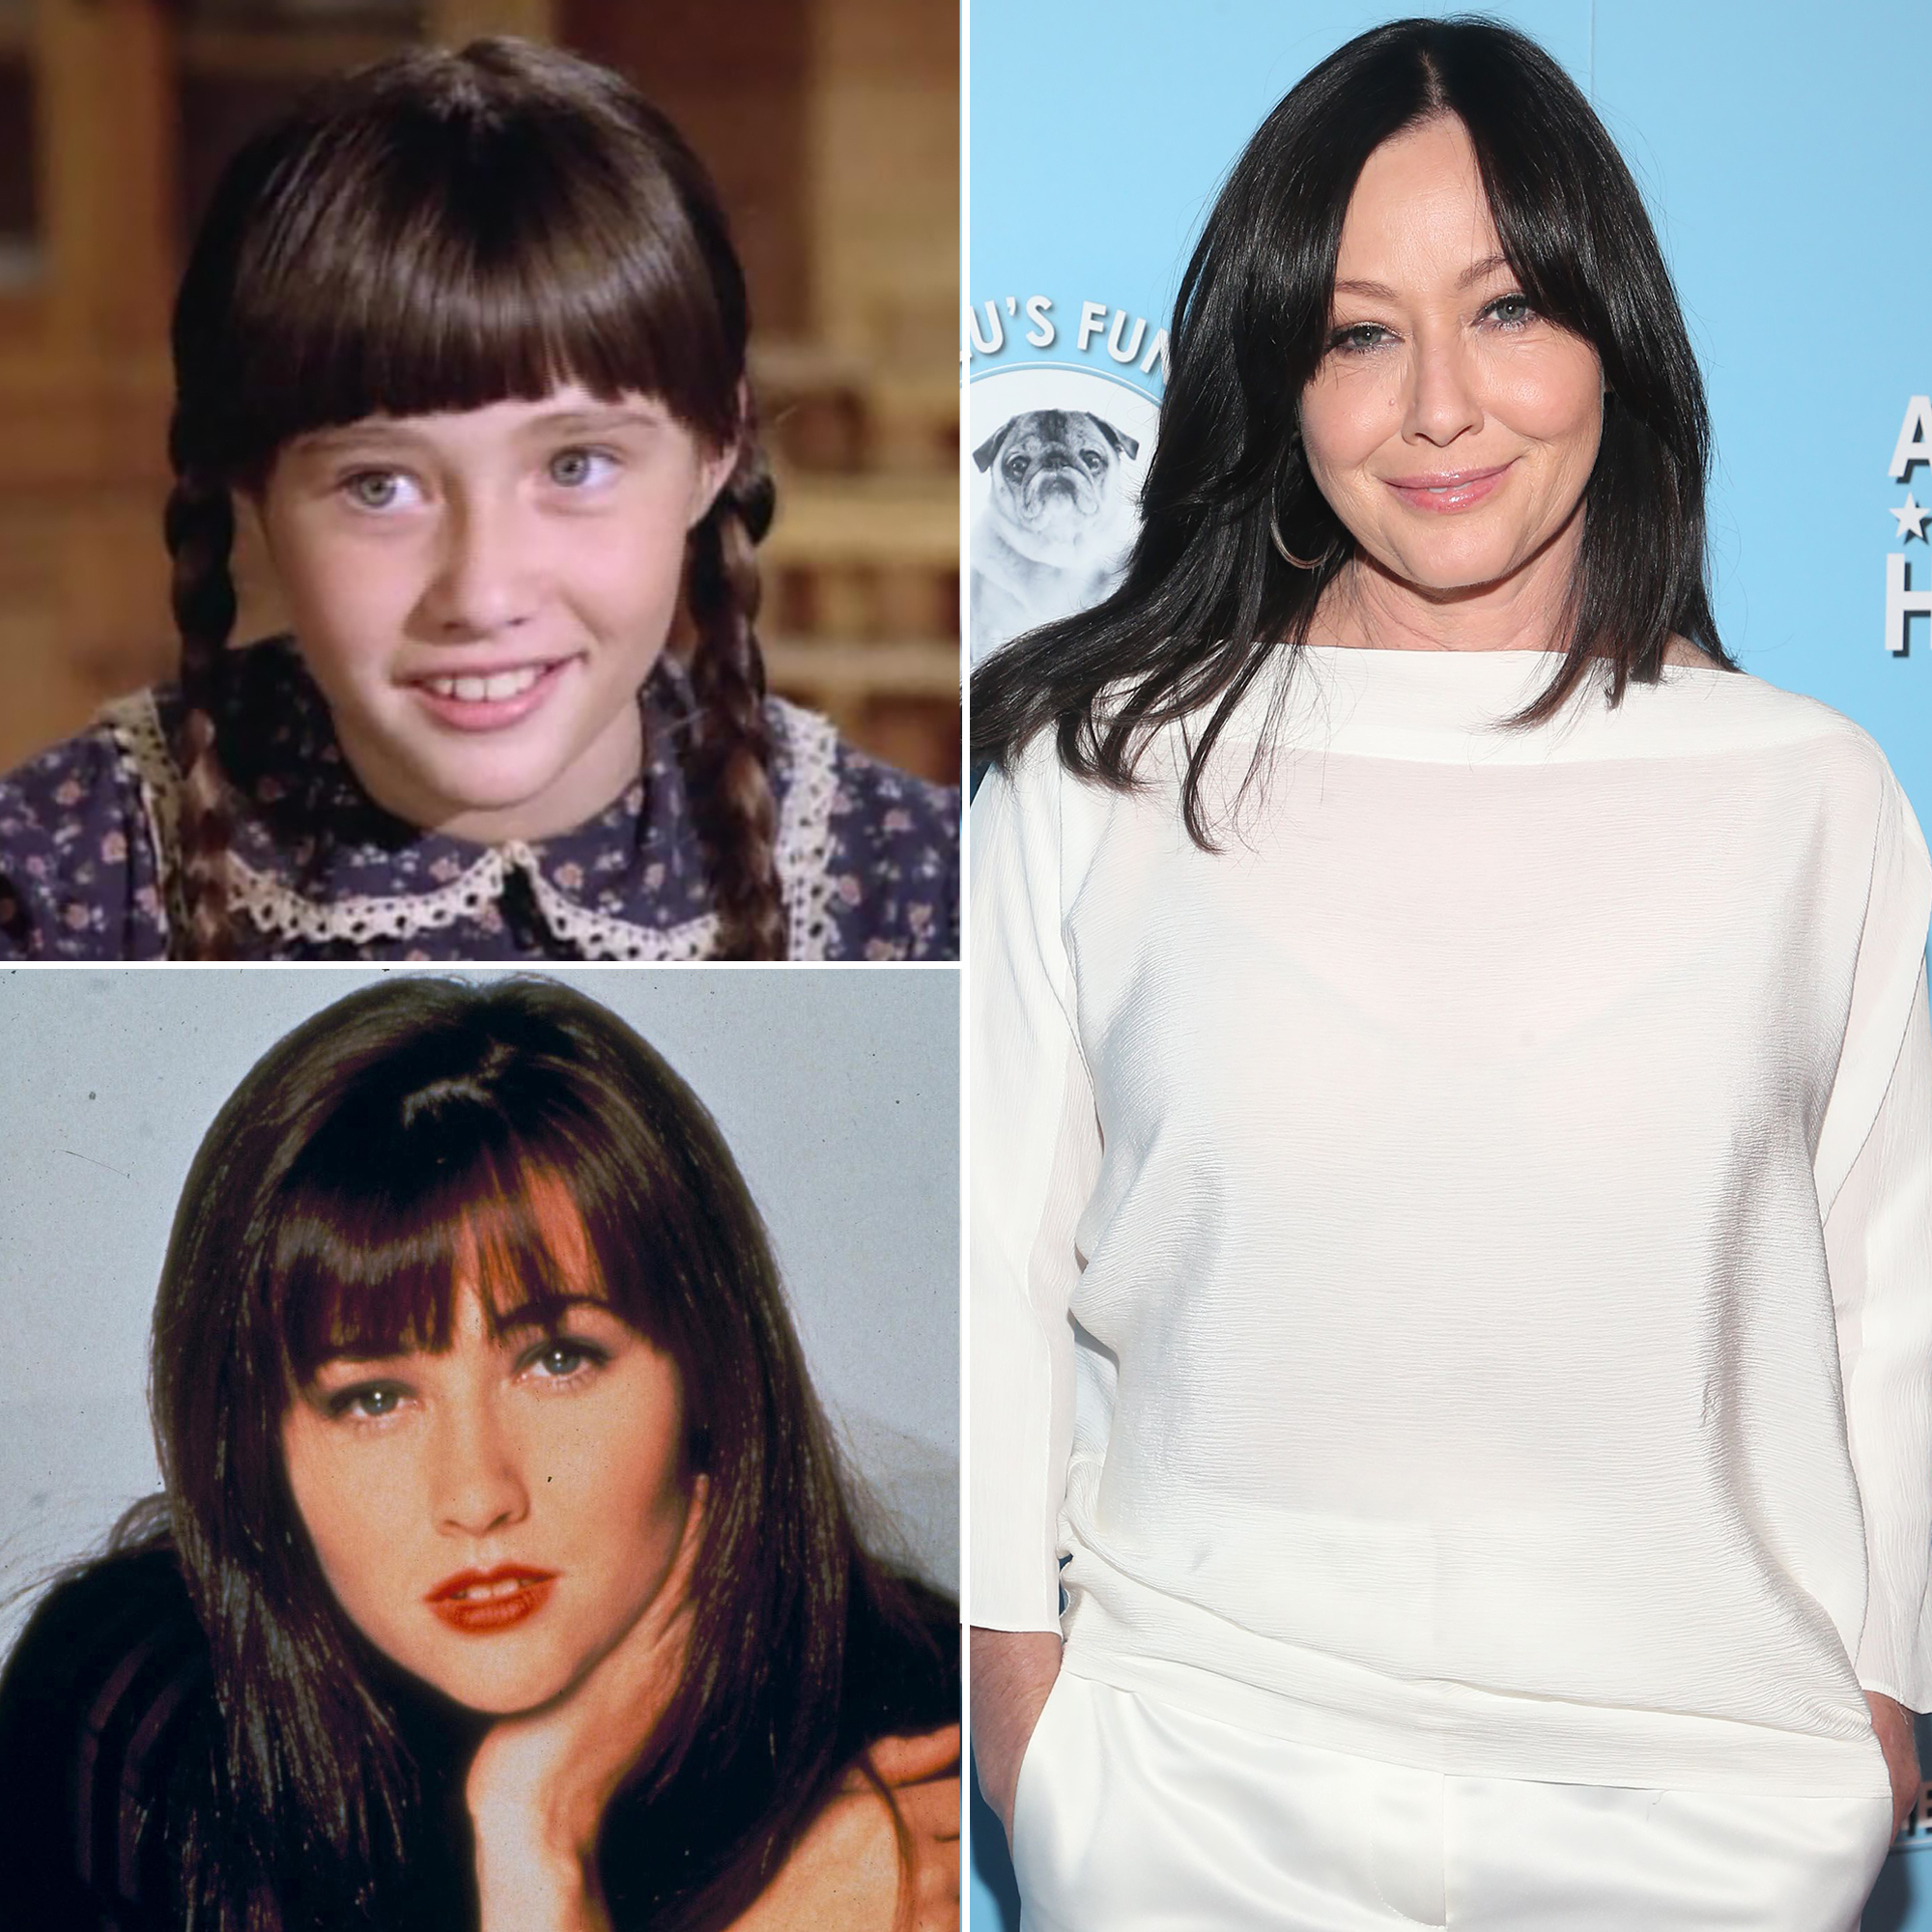 Shannen doherty sexy pics